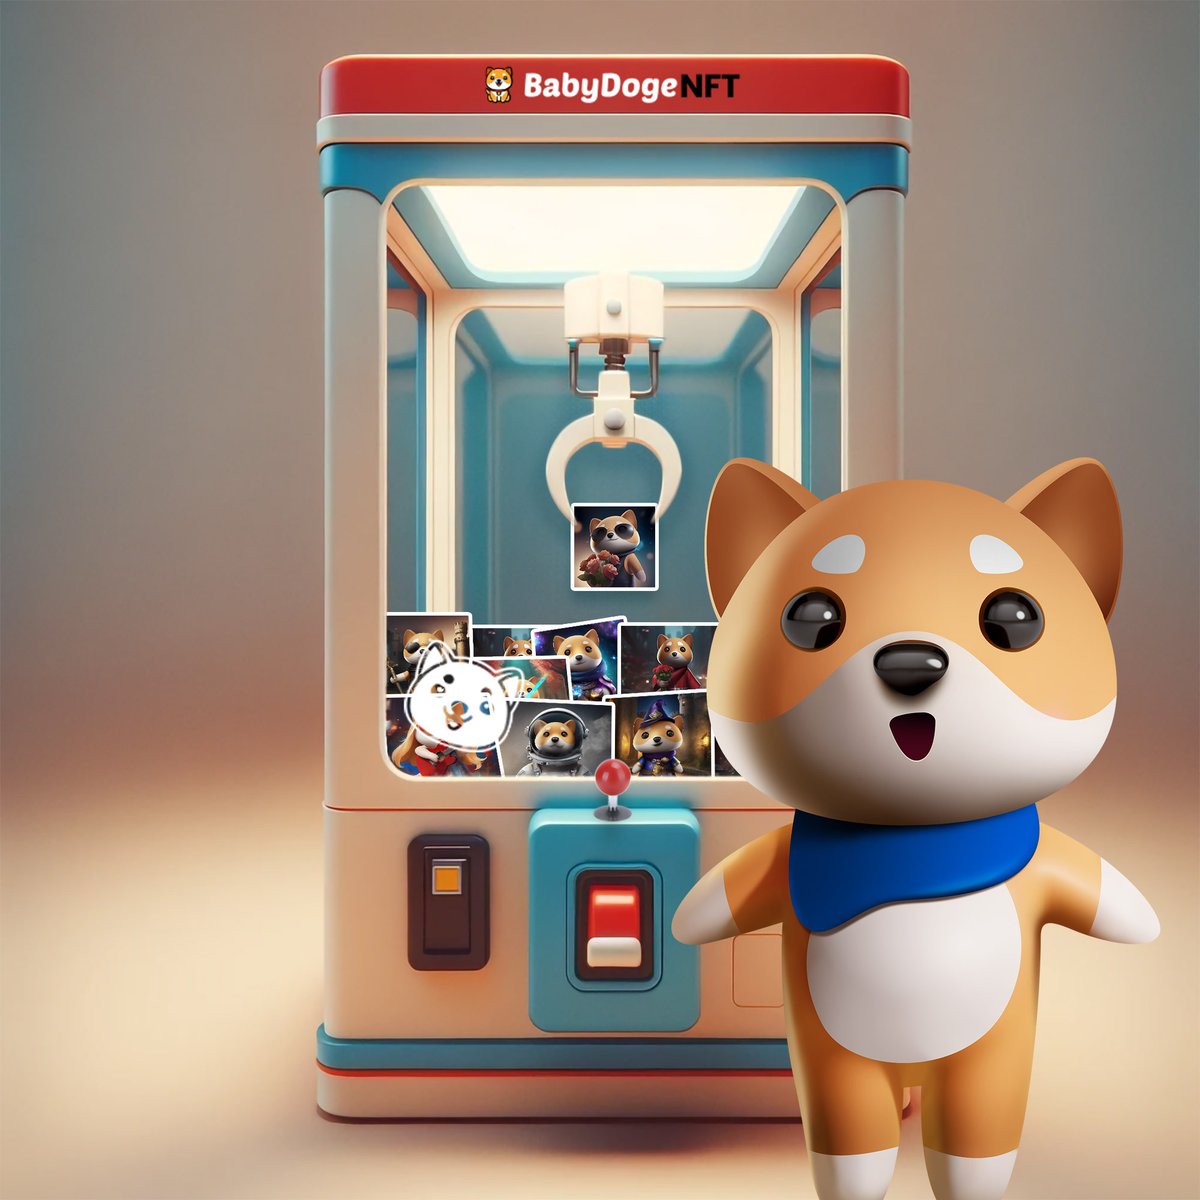 It's almost here, #BabyDogeArmy! The wait is over! Our much-anticipated Baby Doge NFT Marketplace launches Tomorrow! 🎉 Get ready to explore, create, and trade unique AI-generated memes and your favorite NFTs in the vibrant web3 space. Don't miss this! 🎨 #BabyDogeNFT